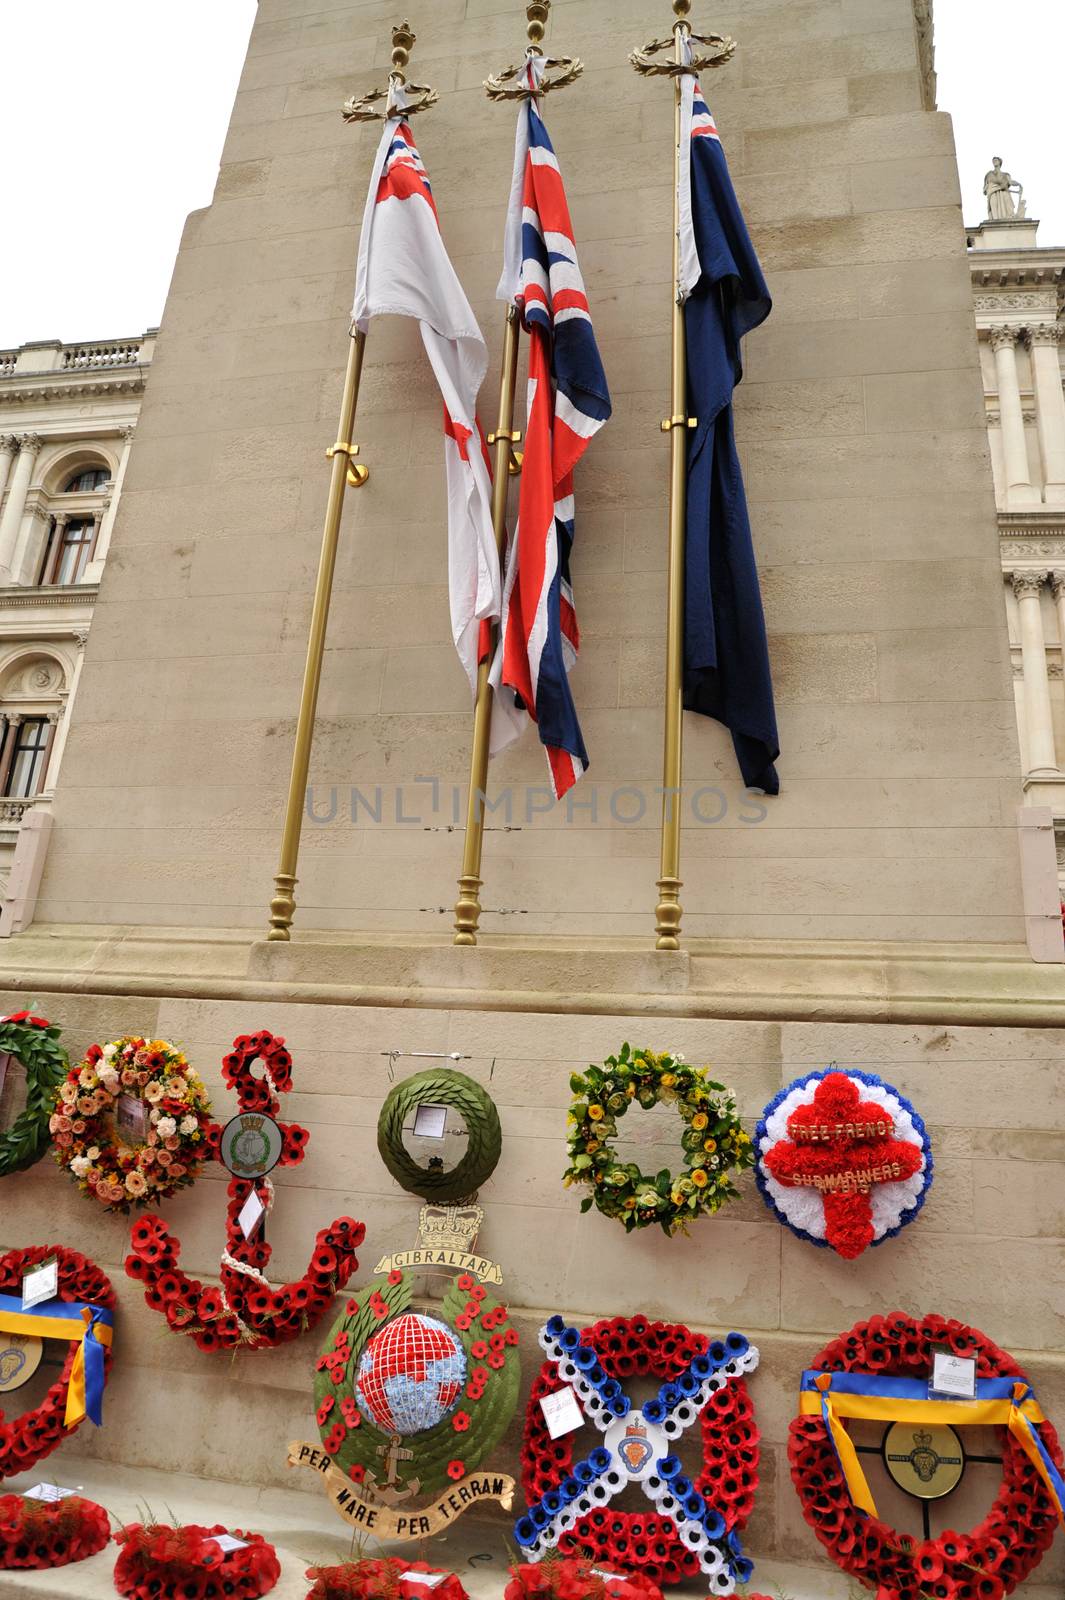 UK, London: Wreaths are laid at the Cenotaph on Whitehall for Remembrance Sunday on November 8, 2015. Both political leaders and members of the royal family visited the site that day during the National Service of Remembrance, honoring those who were killed in combat during World War II and after.